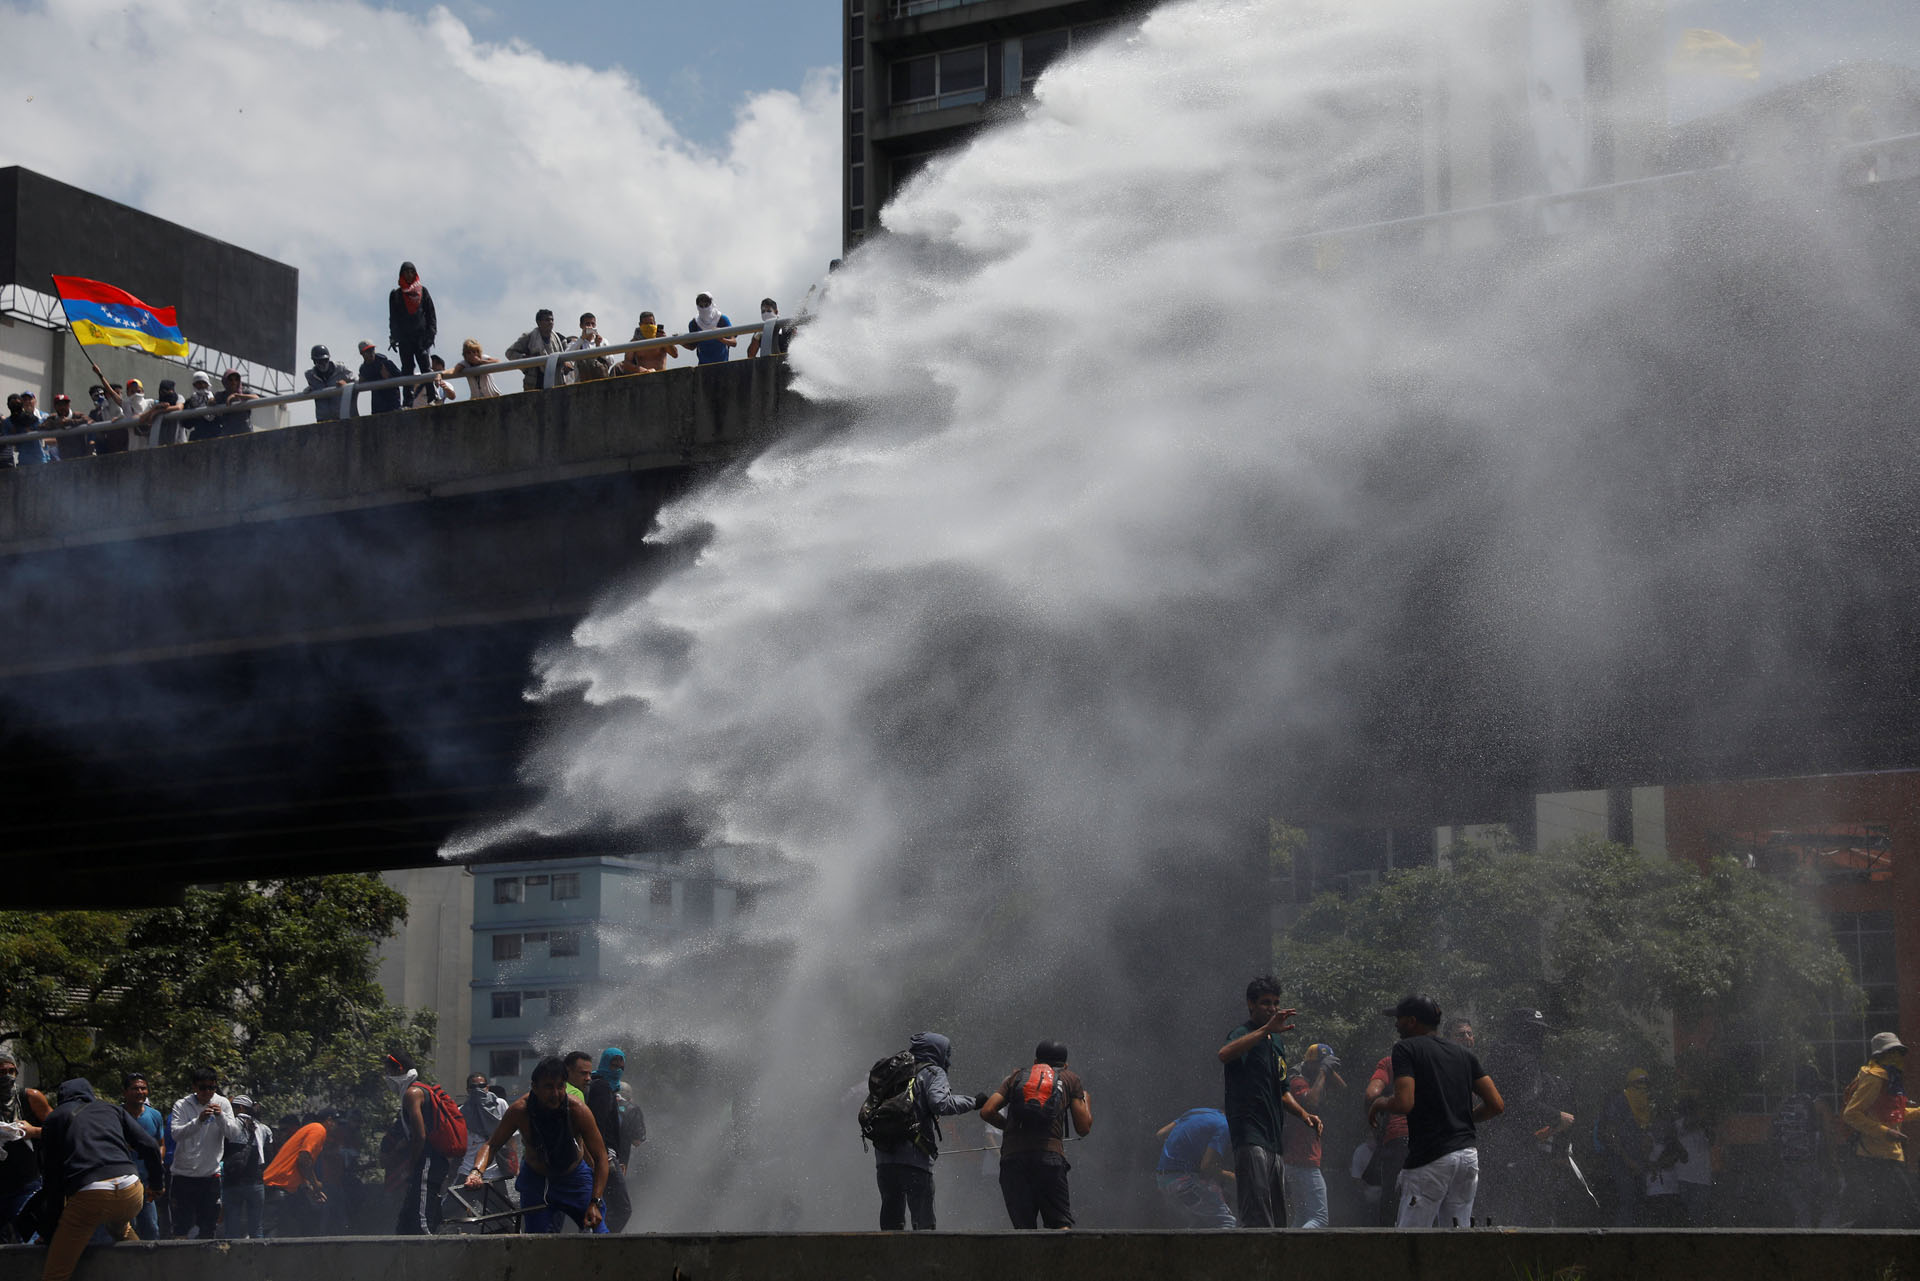 Police use a water cannon to disperse demonstrators during an opposition rally in Caracas, Venezuela April 6, 2017. REUTERS/Carlos Garcia Rawlins